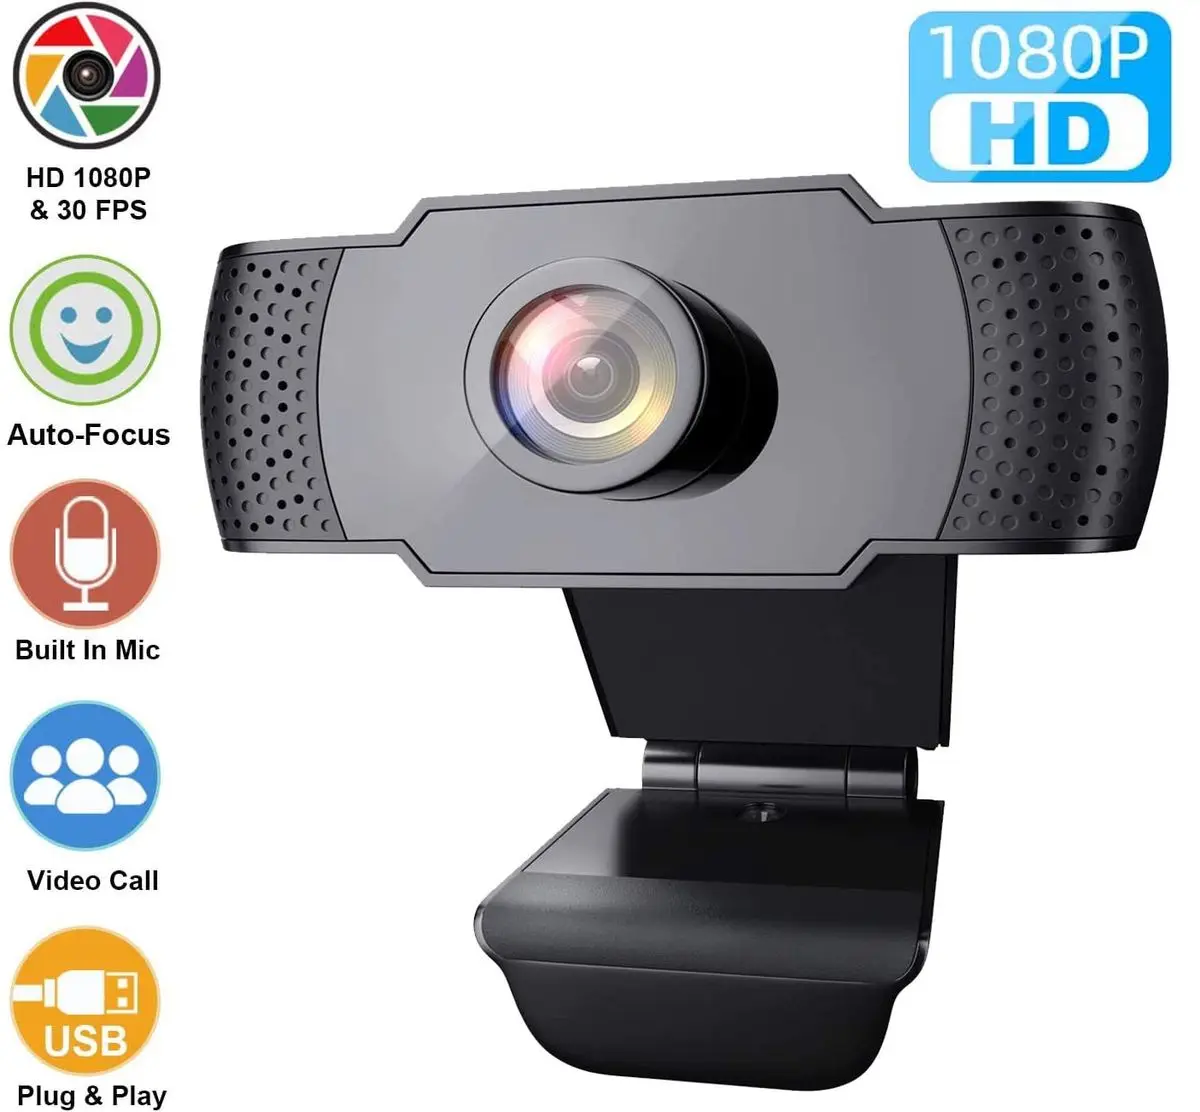 Video Calling,Conferencing Streaming Webcam 1080P Full HD Jelly Comb Computer Webcam USB Web Camera with Built-in Microphone for Skype CM002 Recording 